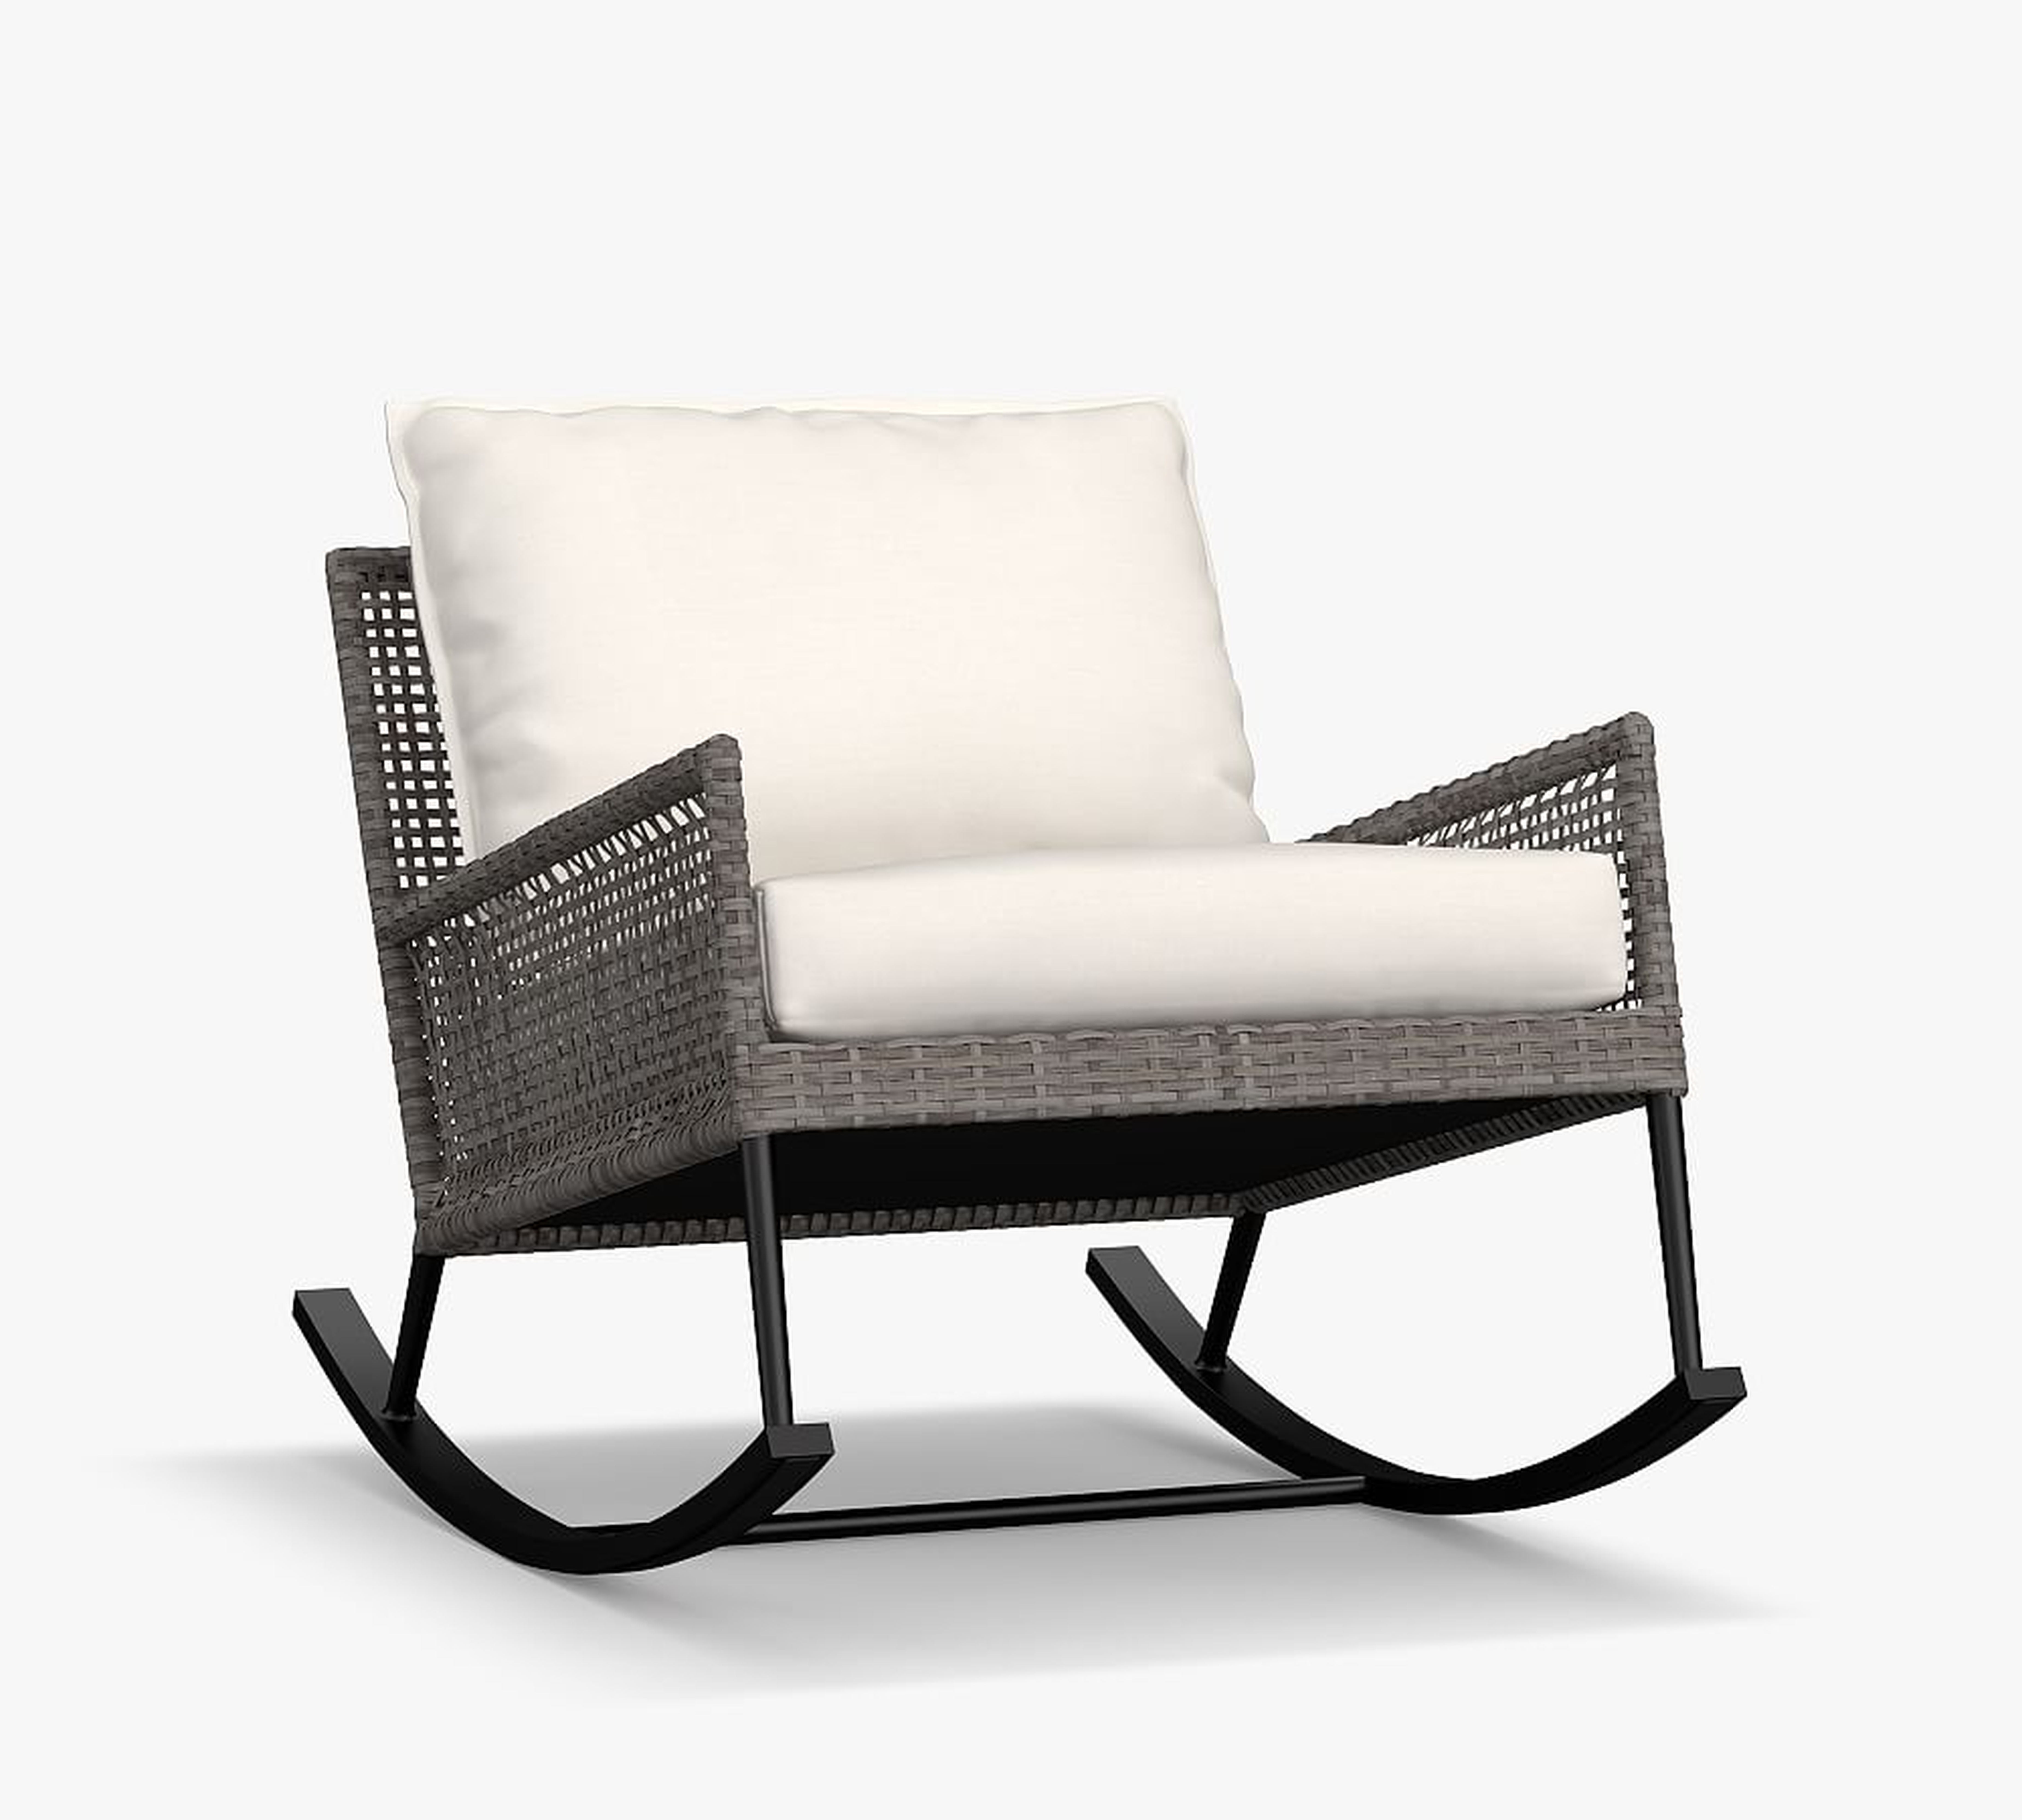 Cammeray All-Weather Wicker Rocking Lounge Chair with Cushion, Gray - Pottery Barn